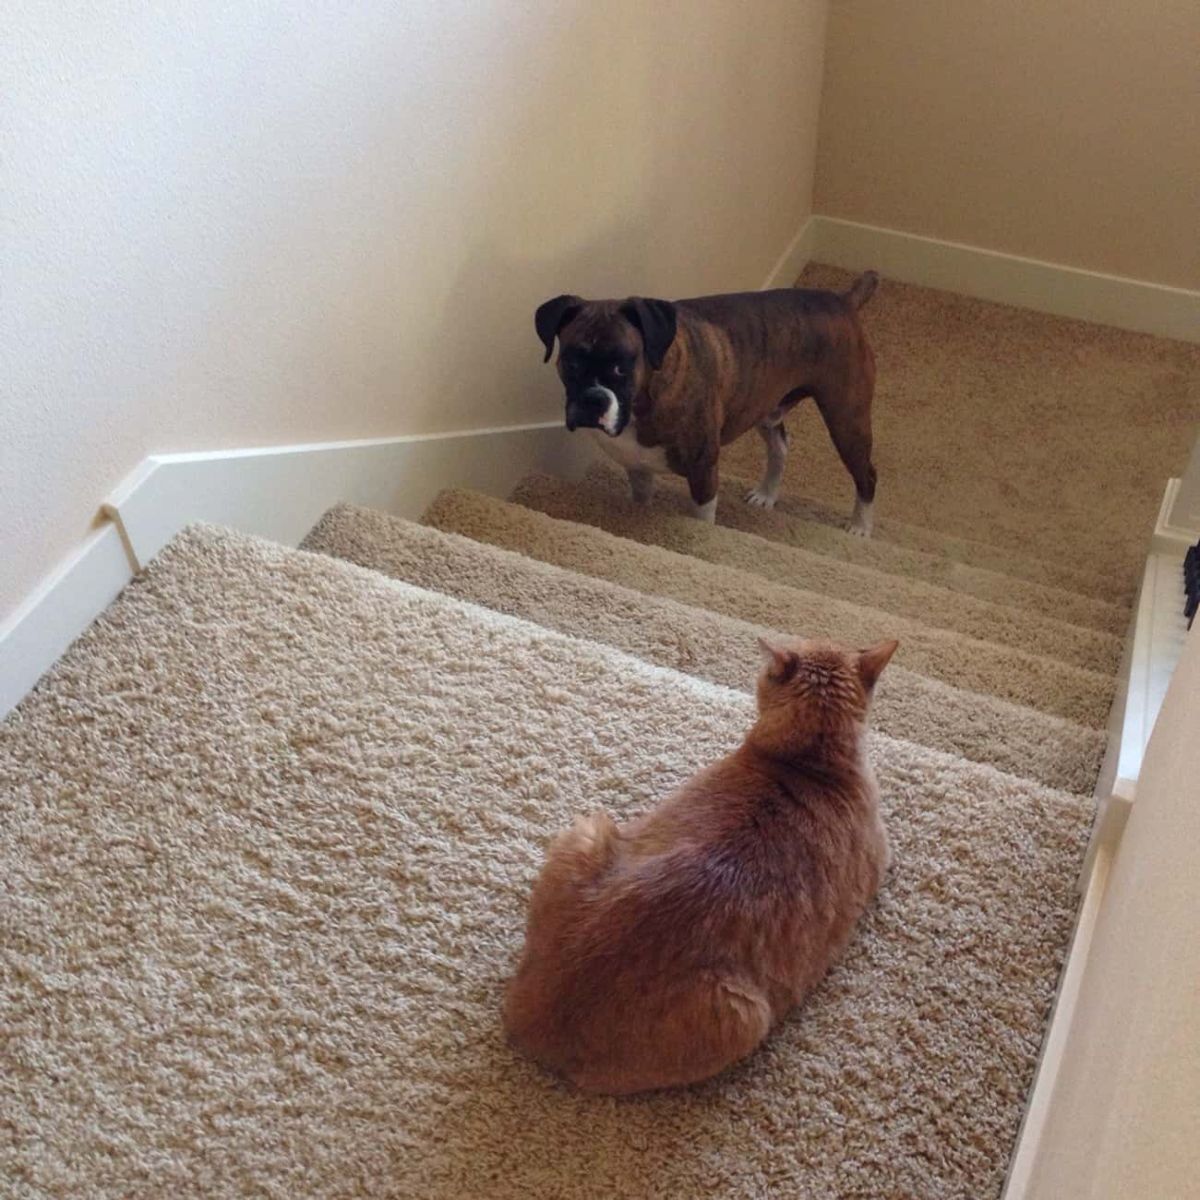 brown and white dog standing at bottom of stairs close to wall looking scared of an orange cat laying on the landing